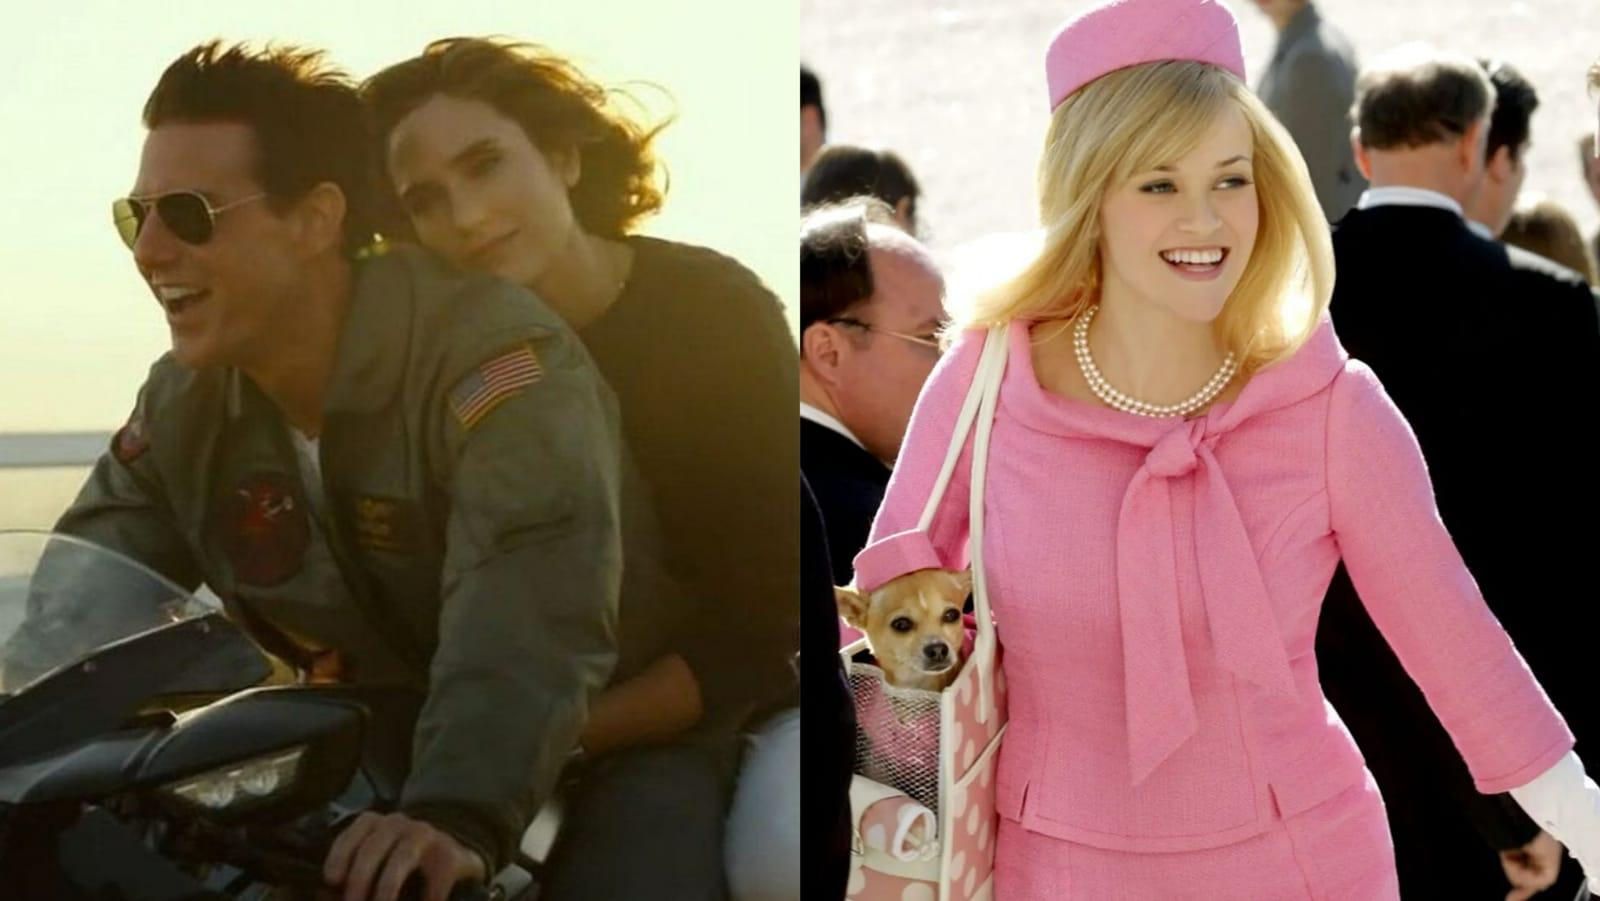 Top Gun 2 and Legally Blonde 2